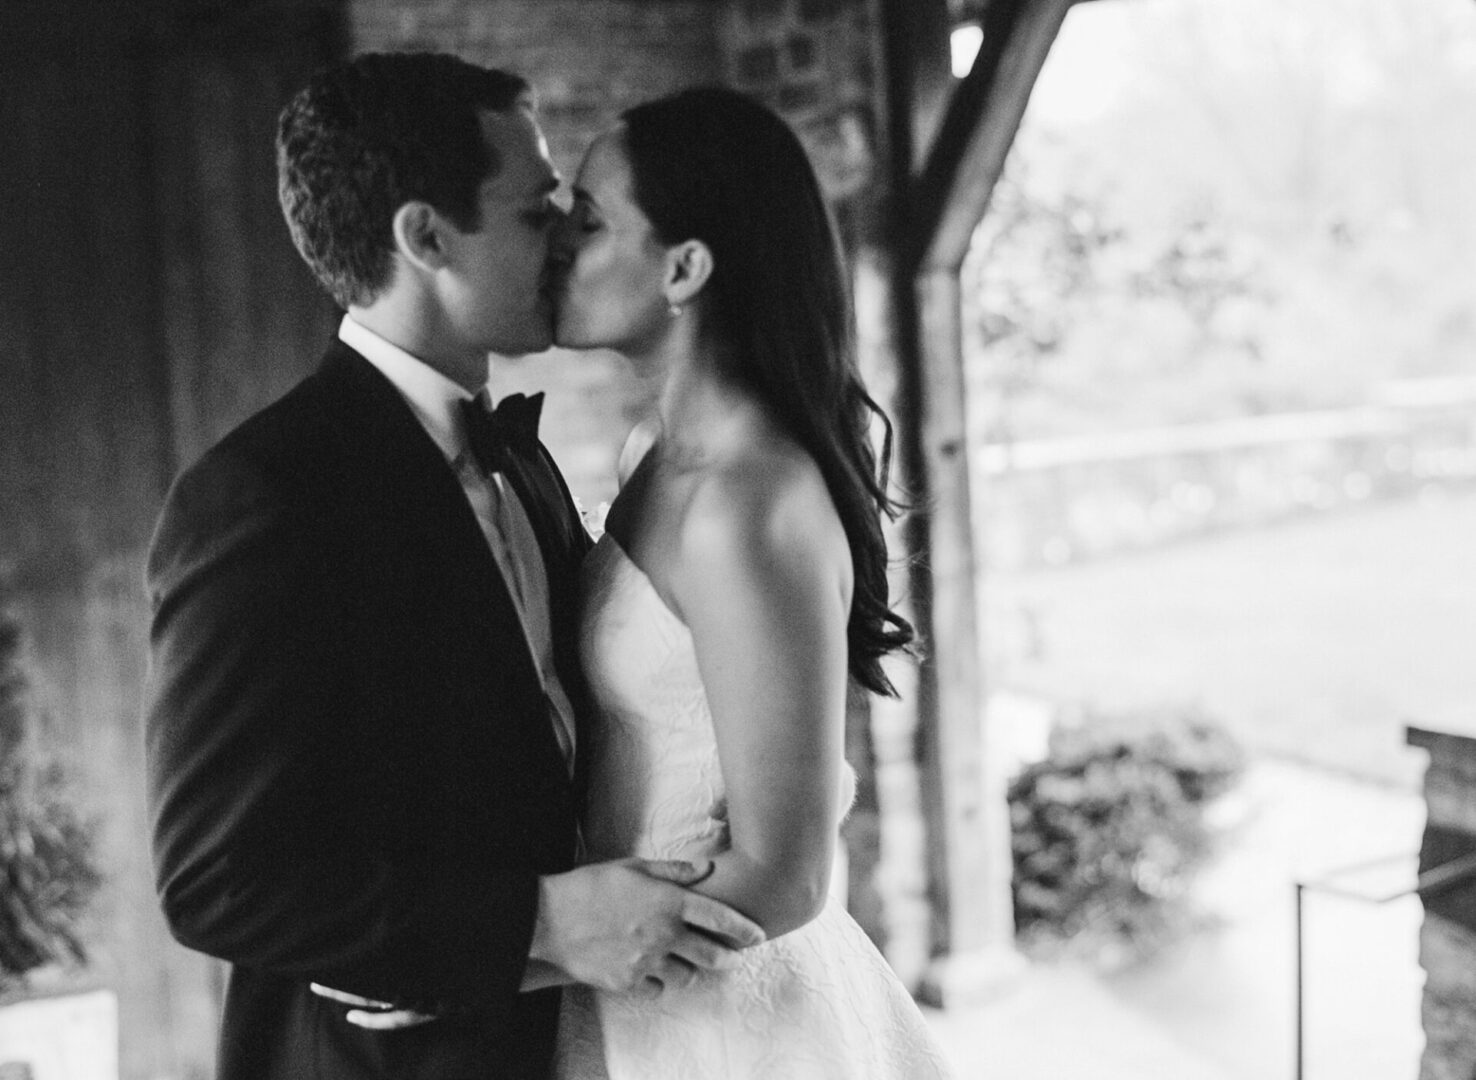 The bride and the groom enjoy a passionate kiss